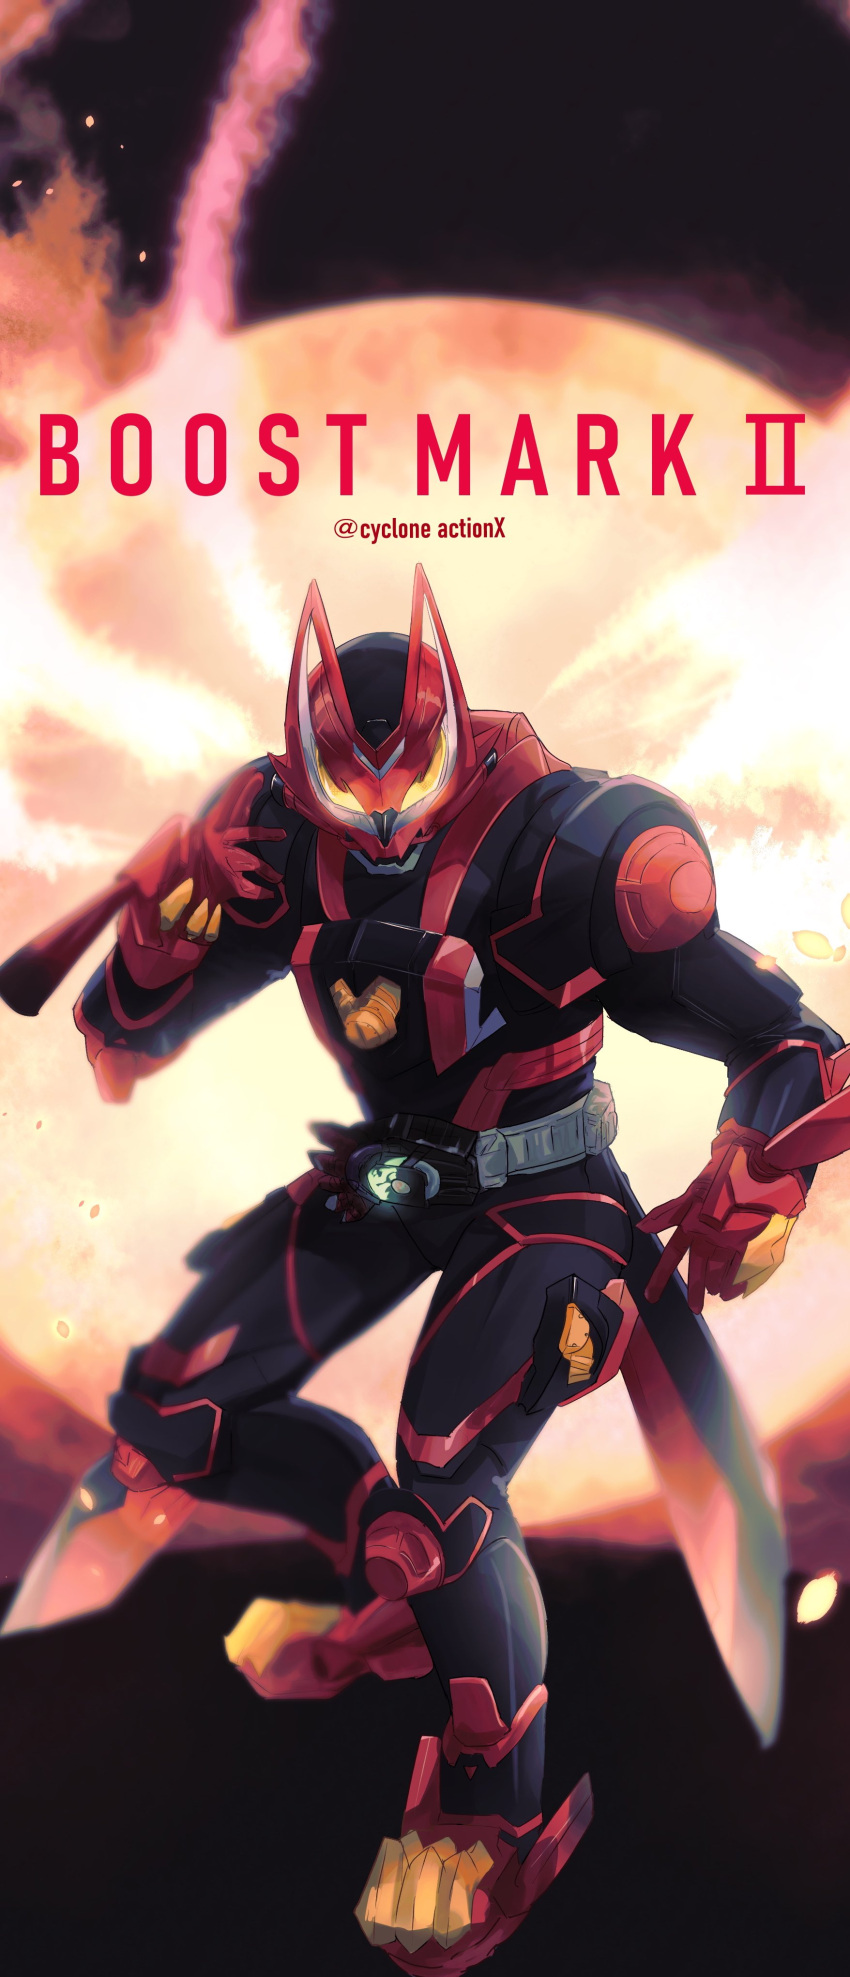 1boy absurdres armor black_armor black_bodysuit bodysuit boost_mark_ii_buckle commentary cowboy_shot cycloneactionx desire_driver fighting_stance fire flame_print fox fox_boy fox_mask gloves glowing glowing_eyes green_fire highres hitodama incoming_attack kamen_rider kamen_rider_geats kamen_rider_geats_(series) kamen_rider_geats_boost_mark_ii kitsune male_focus mask mouth_guard multiple_tails orange_eyes power_armor raise_buckle raised_fist red_footwear red_gloves shoulder_armor solo tail thighs twitter_username